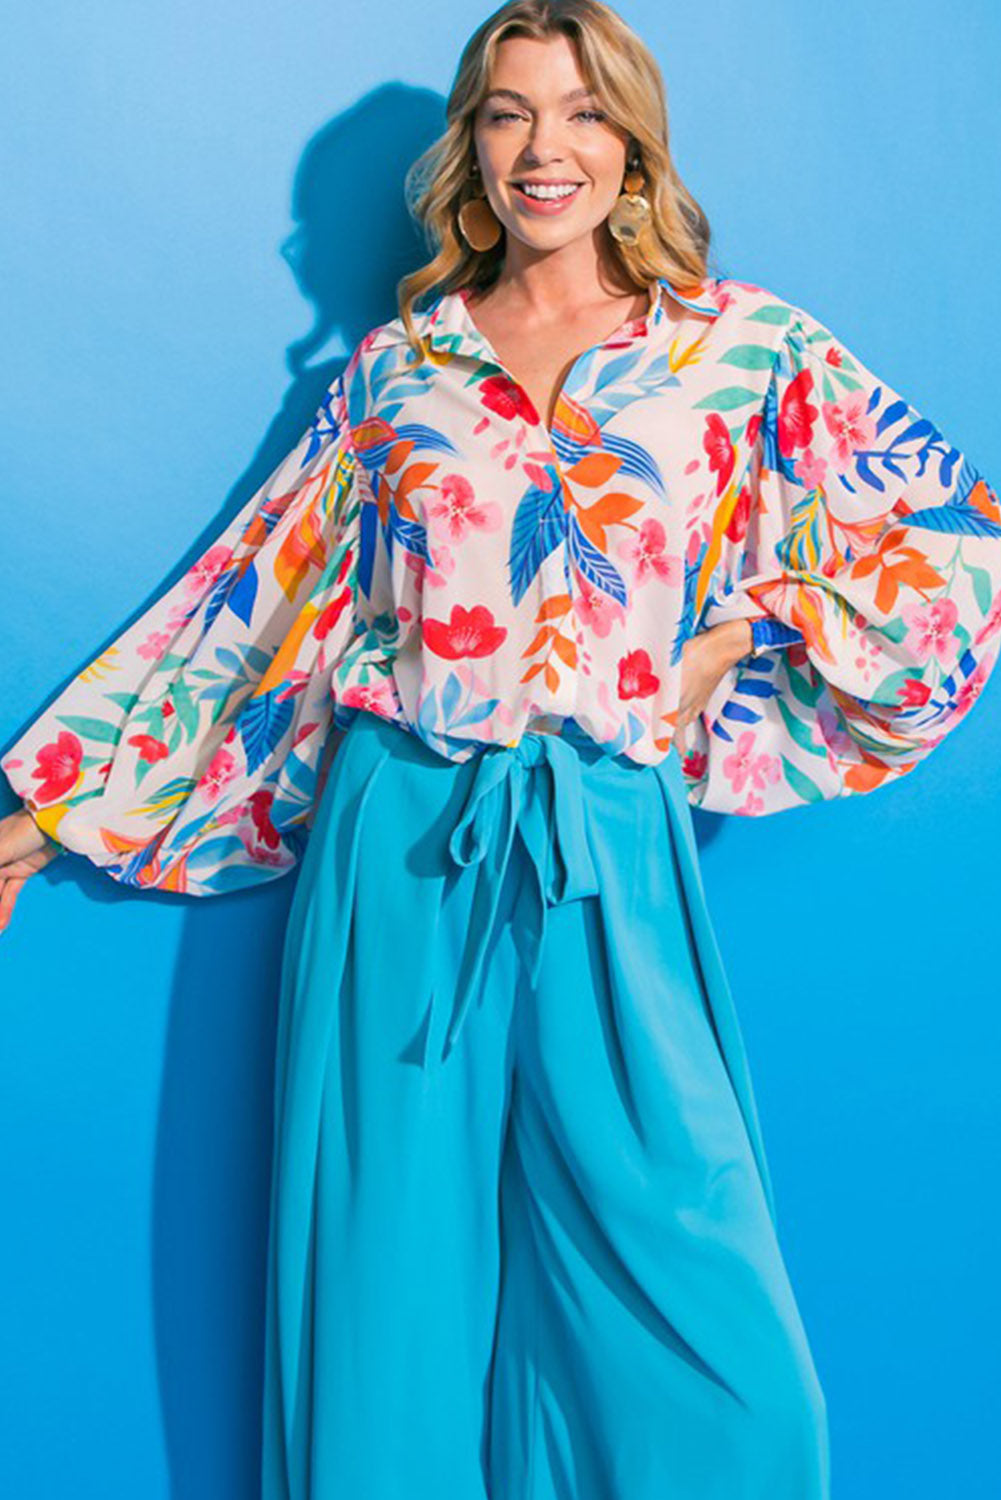 Multicolor Vibrant Floral Printed Billowy Sleeve Shirt